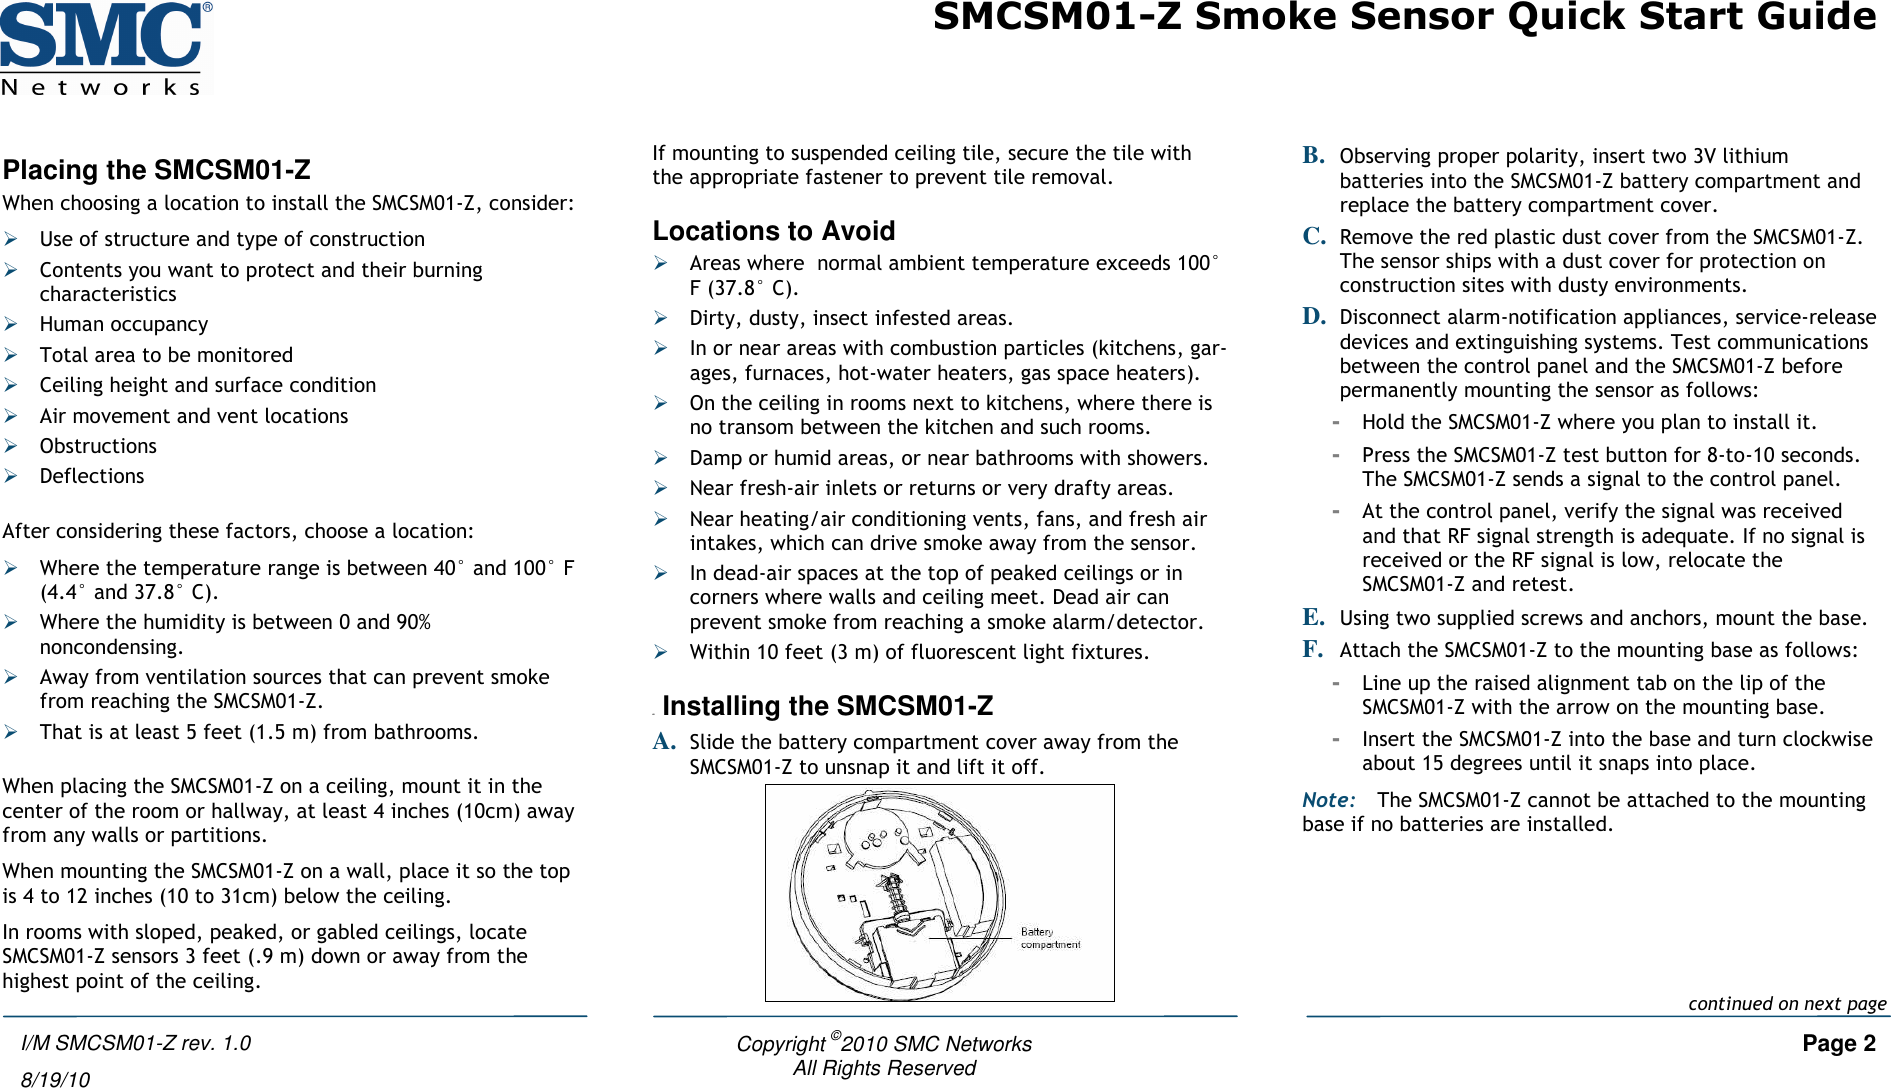 SMCSM01-Z Smoke Sensor Quick Start Guide   Copyright ©2010 SMC Networks     Page 2 All Rights Reserved  I/M SMCSM01-Z rev. 1.0 8/19/10 Placing the SMCSM01-Z When choosing a location to install the SMCSM01-Z, consider:  Use of structure and type of construction  Contents you want to protect and their burning characteristics  Human occupancy  Total area to be monitored  Ceiling height and surface condition  Air movement and vent locations  Obstructions  Deflections  After considering these factors, choose a location:  Where the temperature range is between 40° and 100° F (4.4° and 37.8° C).  Where the humidity is between 0 and 90% noncondensing.  Away from ventilation sources that can prevent smoke from reaching the SMCSM01-Z.  That is at least 5 feet (1.5 m) from bathrooms.  When placing the SMCSM01-Z on a ceiling, mount it in the center of the room or hallway, at least 4 inches (10cm) away from any walls or partitions. When mounting the SMCSM01-Z on a wall, place it so the top is 4 to 12 inches (10 to 31cm) below the ceiling. In rooms with sloped, peaked, or gabled ceilings, locate SMCSM01-Z sensors 3 feet (.9 m) down or away from the highest point of the ceiling. If mounting to suspended ceiling tile, secure the tile with the appropriate fastener to prevent tile removal. Locations to Avoid  Areas where  normal ambient temperature exceeds 100° F (37.8° C).  Dirty, dusty, insect infested areas.  In or near areas with combustion particles (kitchens, gar-ages, furnaces, hot-water heaters, gas space heaters).  On the ceiling in rooms next to kitchens, where there is no transom between the kitchen and such rooms.  Damp or humid areas, or near bathrooms with showers.   Near fresh-air inlets or returns or very drafty areas.  Near heating/air conditioning vents, fans, and fresh air intakes, which can drive smoke away from the sensor.  In dead-air spaces at the top of peaked ceilings or in corners where walls and ceiling meet. Dead air can prevent smoke from reaching a smoke alarm/detector.  Within 10 feet (3 m) of fluorescent light fixtures.  4B Installing the SMCSM01-Z A. Slide the battery compartment cover away from the SMCSM01-Z to unsnap it and lift it off.  B. Observing proper polarity, insert two 3V lithium batteries into the SMCSM01-Z battery compartment and replace the battery compartment cover. C. Remove the red plastic dust cover from the SMCSM01-Z. The sensor ships with a dust cover for protection on construction sites with dusty environments. D. Disconnect alarm-notification appliances, service-release devices and extinguishing systems. Test communications between the control panel and the SMCSM01-Z before permanently mounting the sensor as follows: - Hold the SMCSM01-Z where you plan to install it. - Press the SMCSM01-Z test button for 8-to-10 seconds. The SMCSM01-Z sends a signal to the control panel. - At the control panel, verify the signal was received and that RF signal strength is adequate. If no signal is received or the RF signal is low, relocate the SMCSM01-Z and retest. E. Using two supplied screws and anchors, mount the base. F. Attach the SMCSM01-Z to the mounting base as follows: - Line up the raised alignment tab on the lip of the SMCSM01-Z with the arrow on the mounting base. - Insert the SMCSM01-Z into the base and turn clockwise about 15 degrees until it snaps into place. Note: The SMCSM01-Z cannot be attached to the mounting base if no batteries are installed. continued on next page 